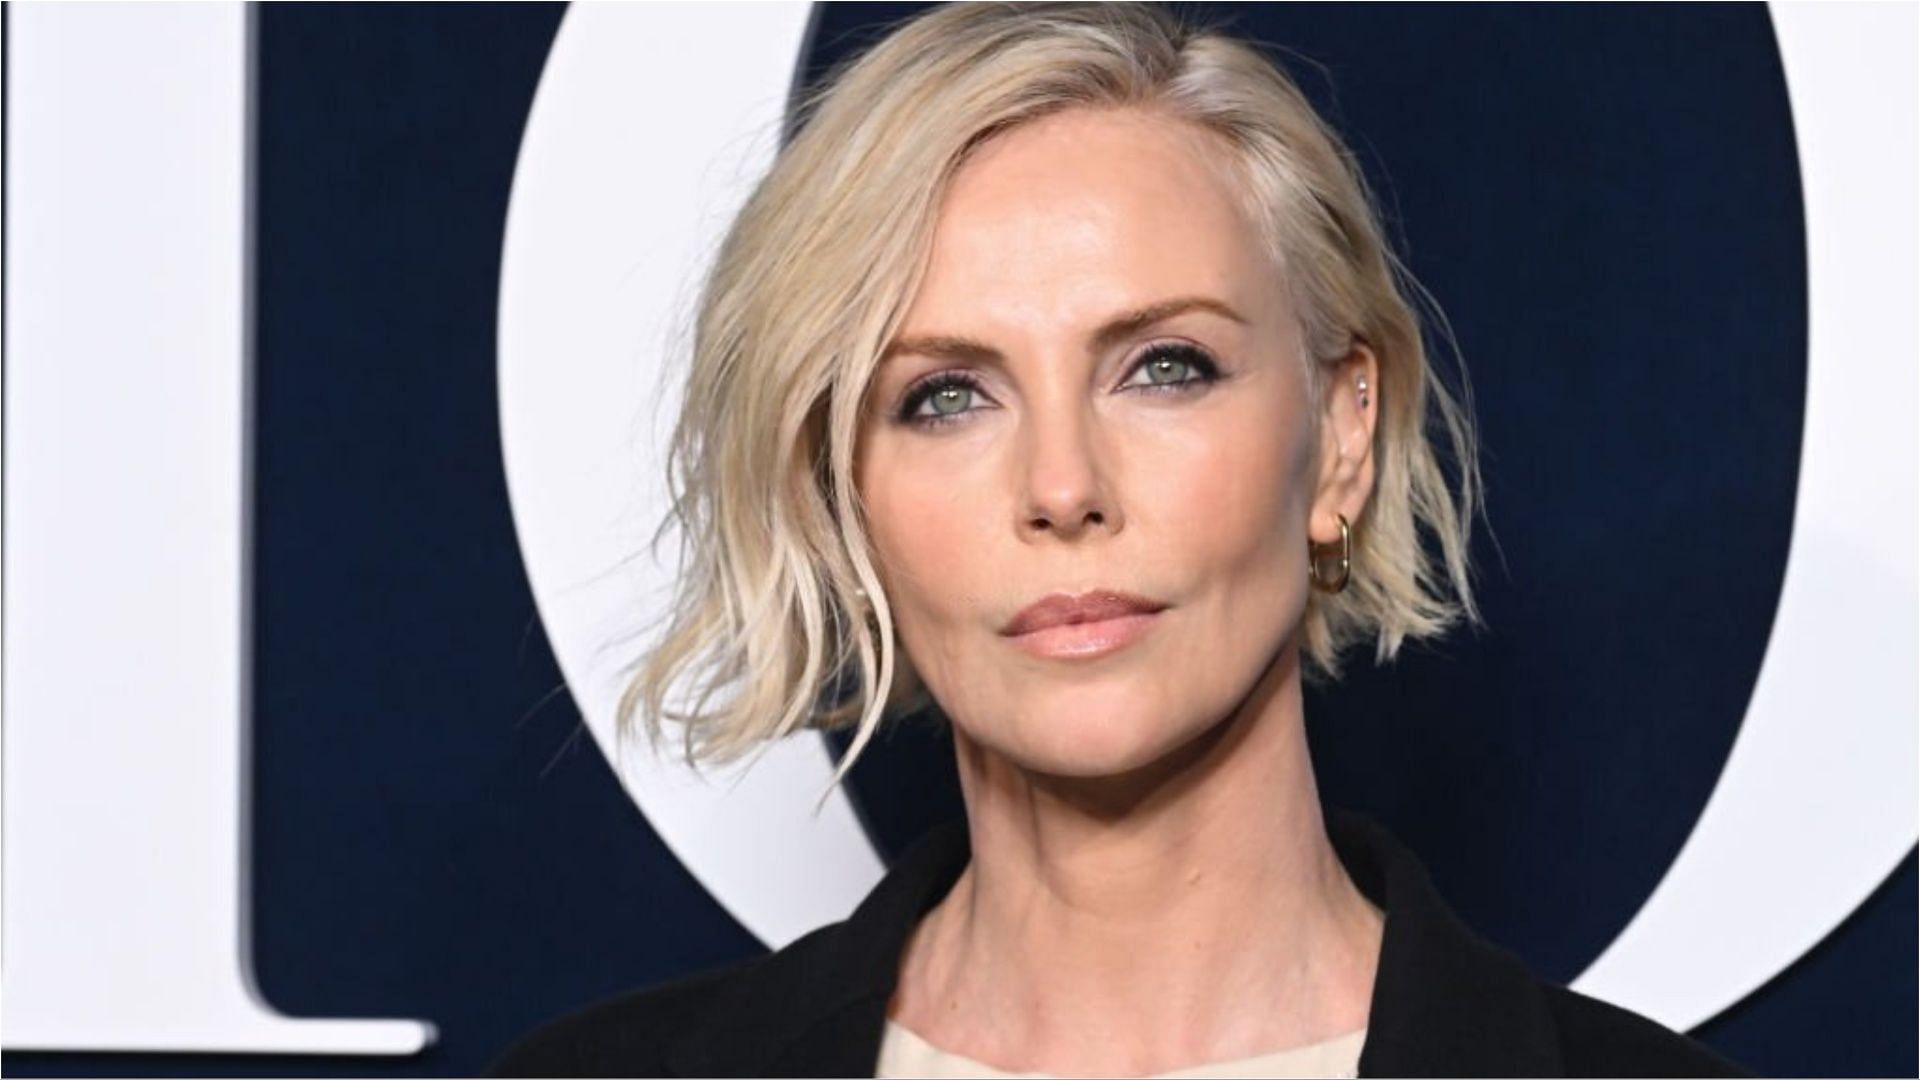 Charlize Theron said that she loves herself (Image via Stephane Cardinale/Getty Images)